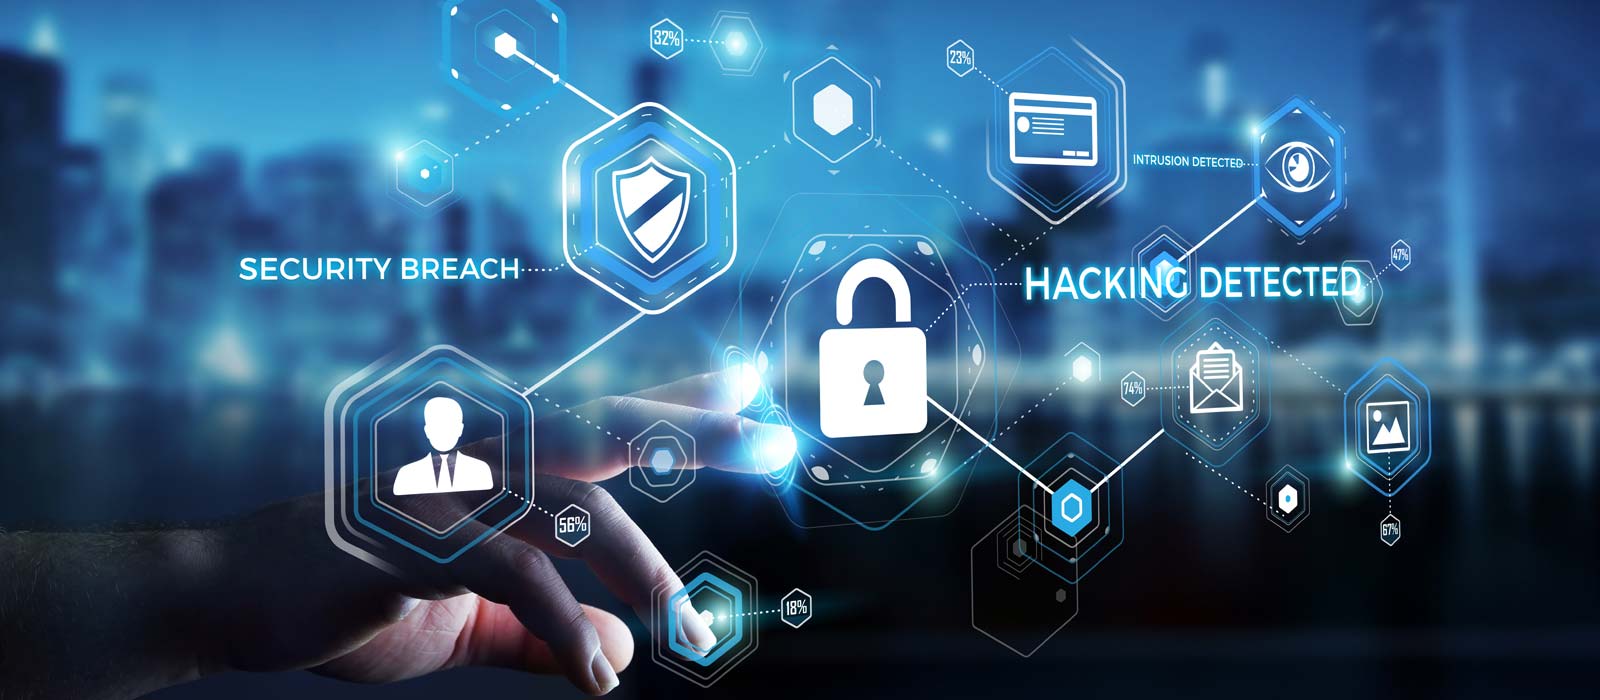 What Is IoT In Cyber Security